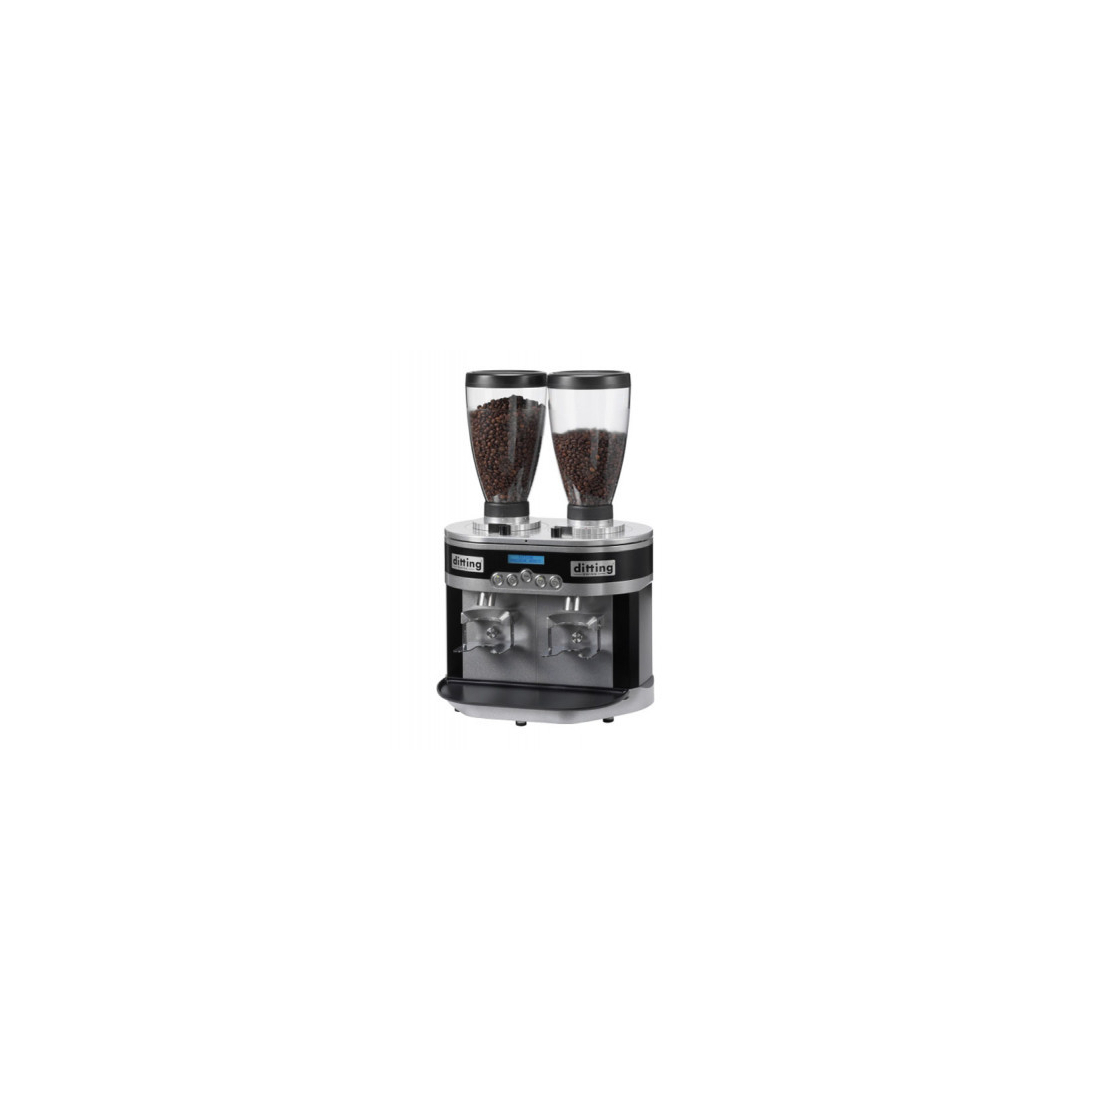 Ditting ,KED 640, Double Hopper Espresso Grinder|mkayn|مكاين